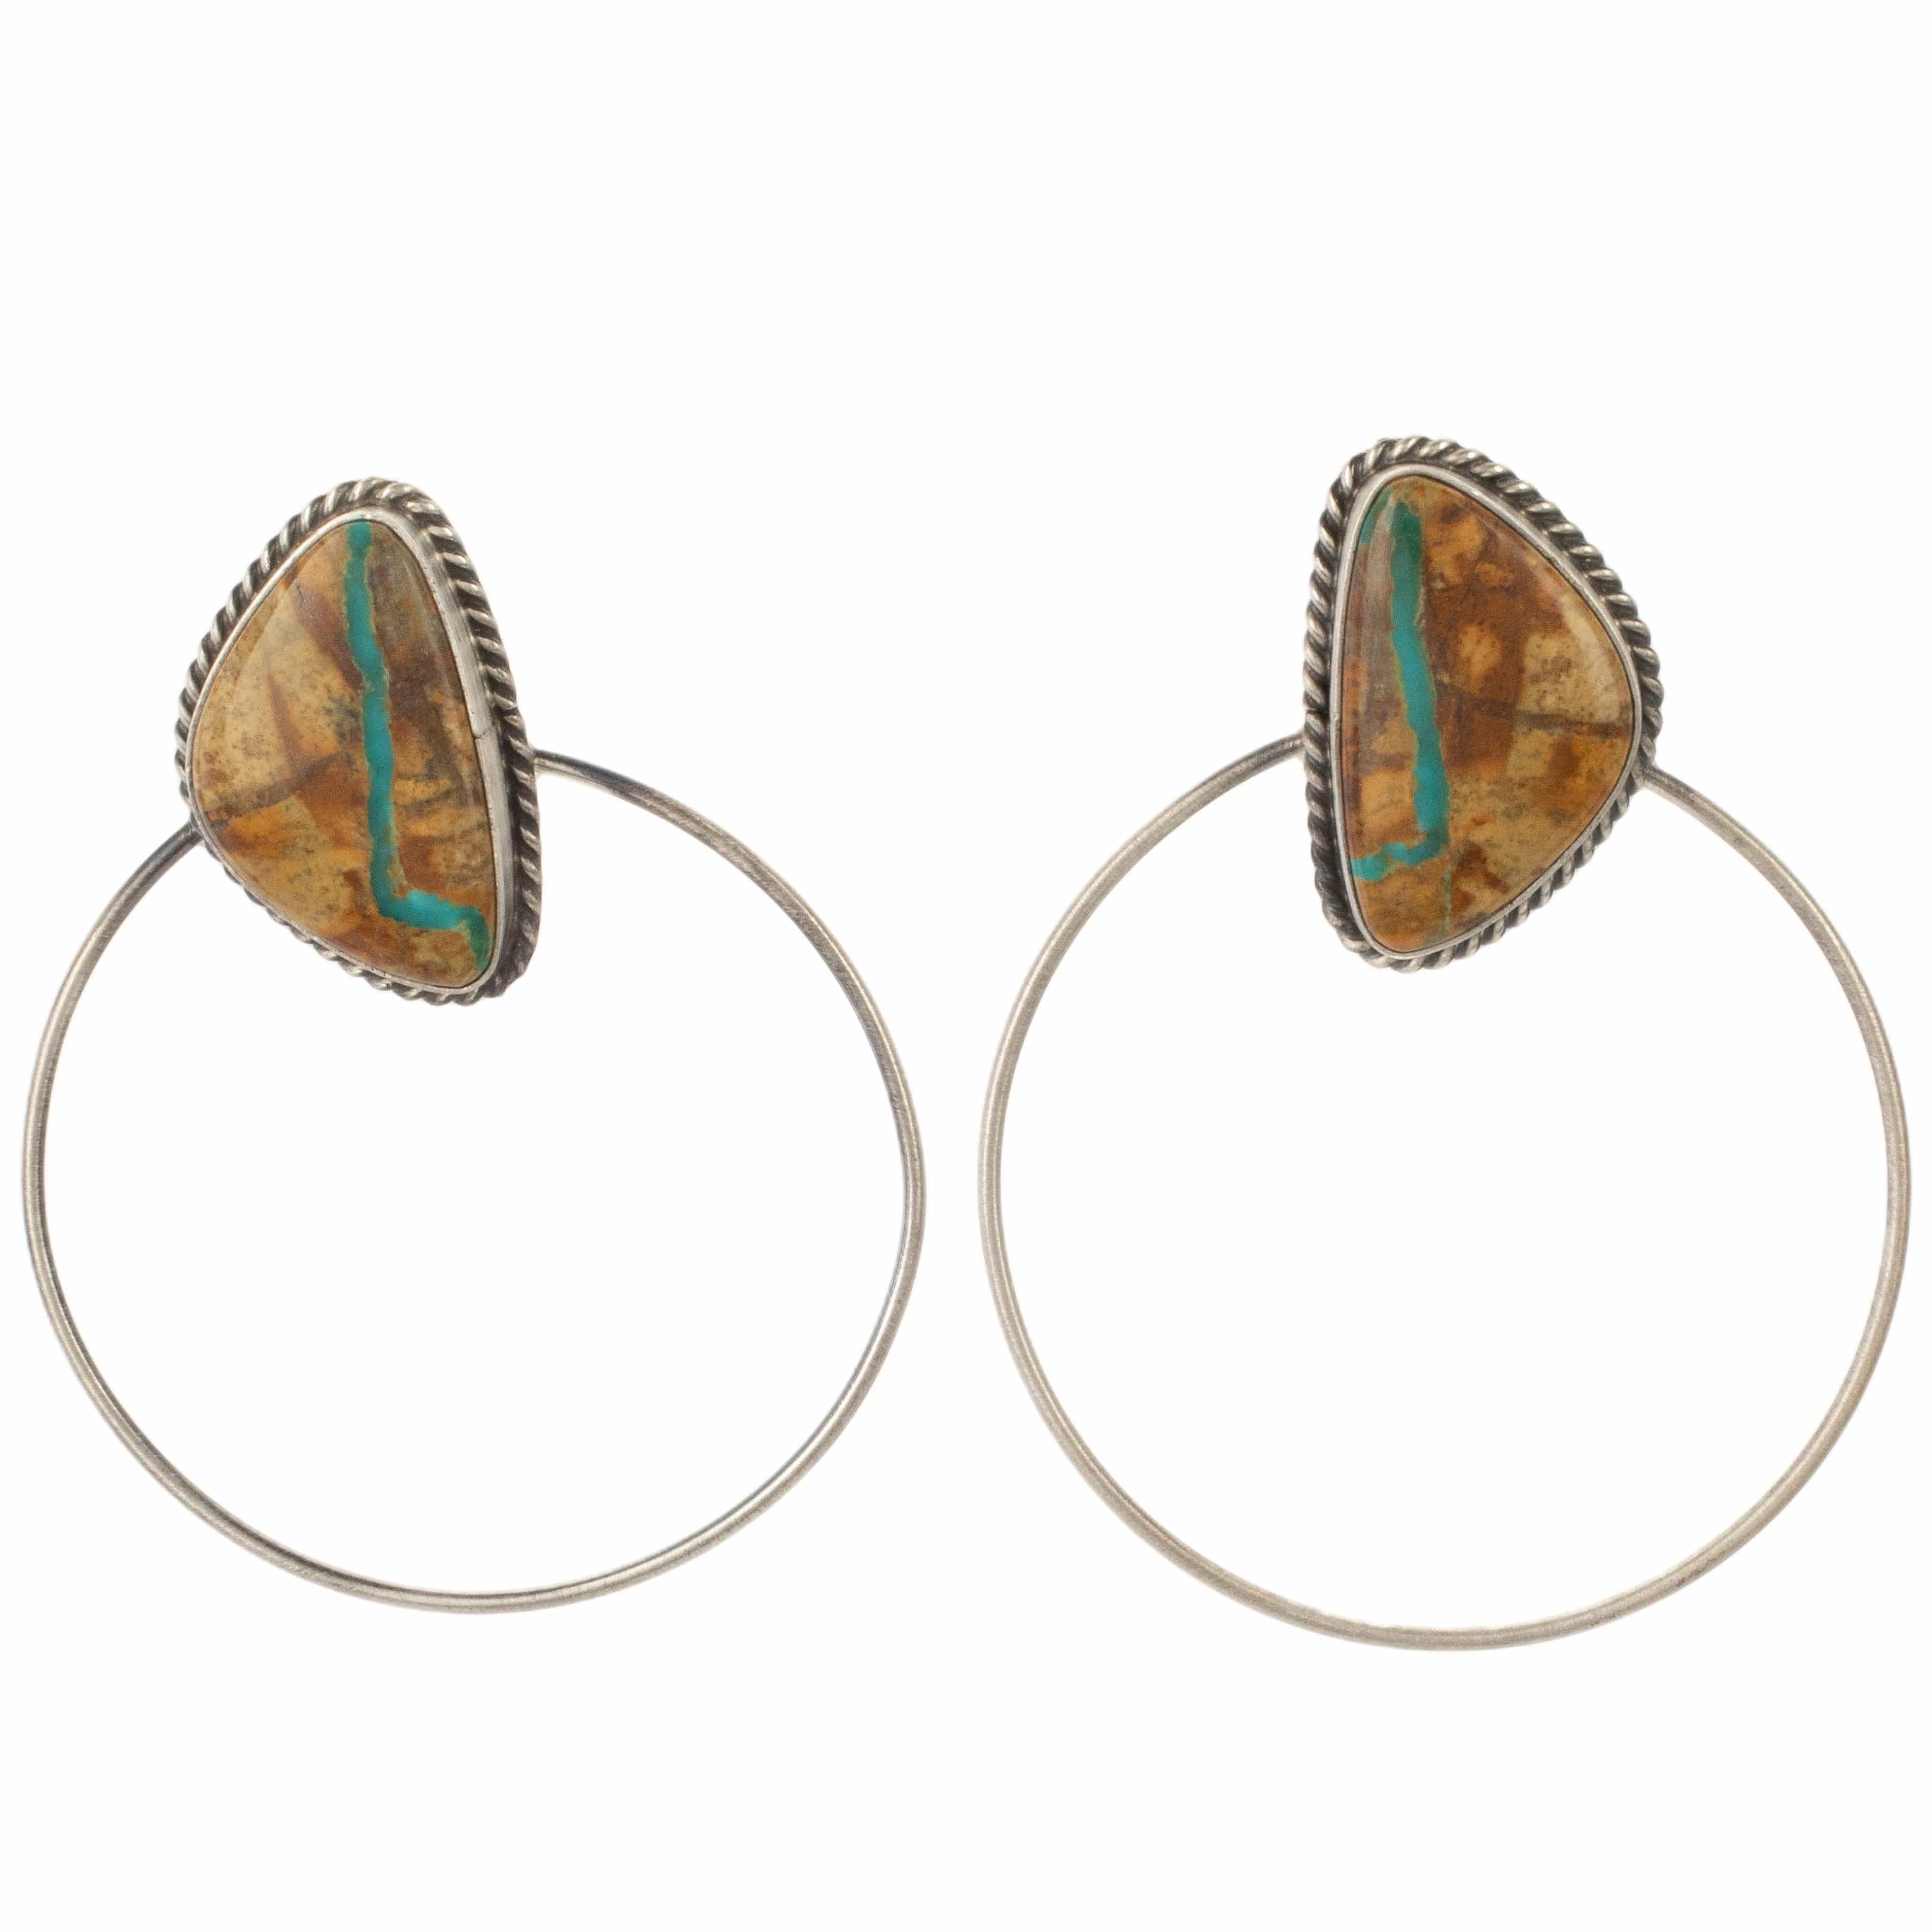 Kalifano Native American Jewelry Eloise Kee Navajo Boulder Turquoise USA Native American Made 925 Sterling Silver Hoop Earrings with Stud Backing NAE1500.004